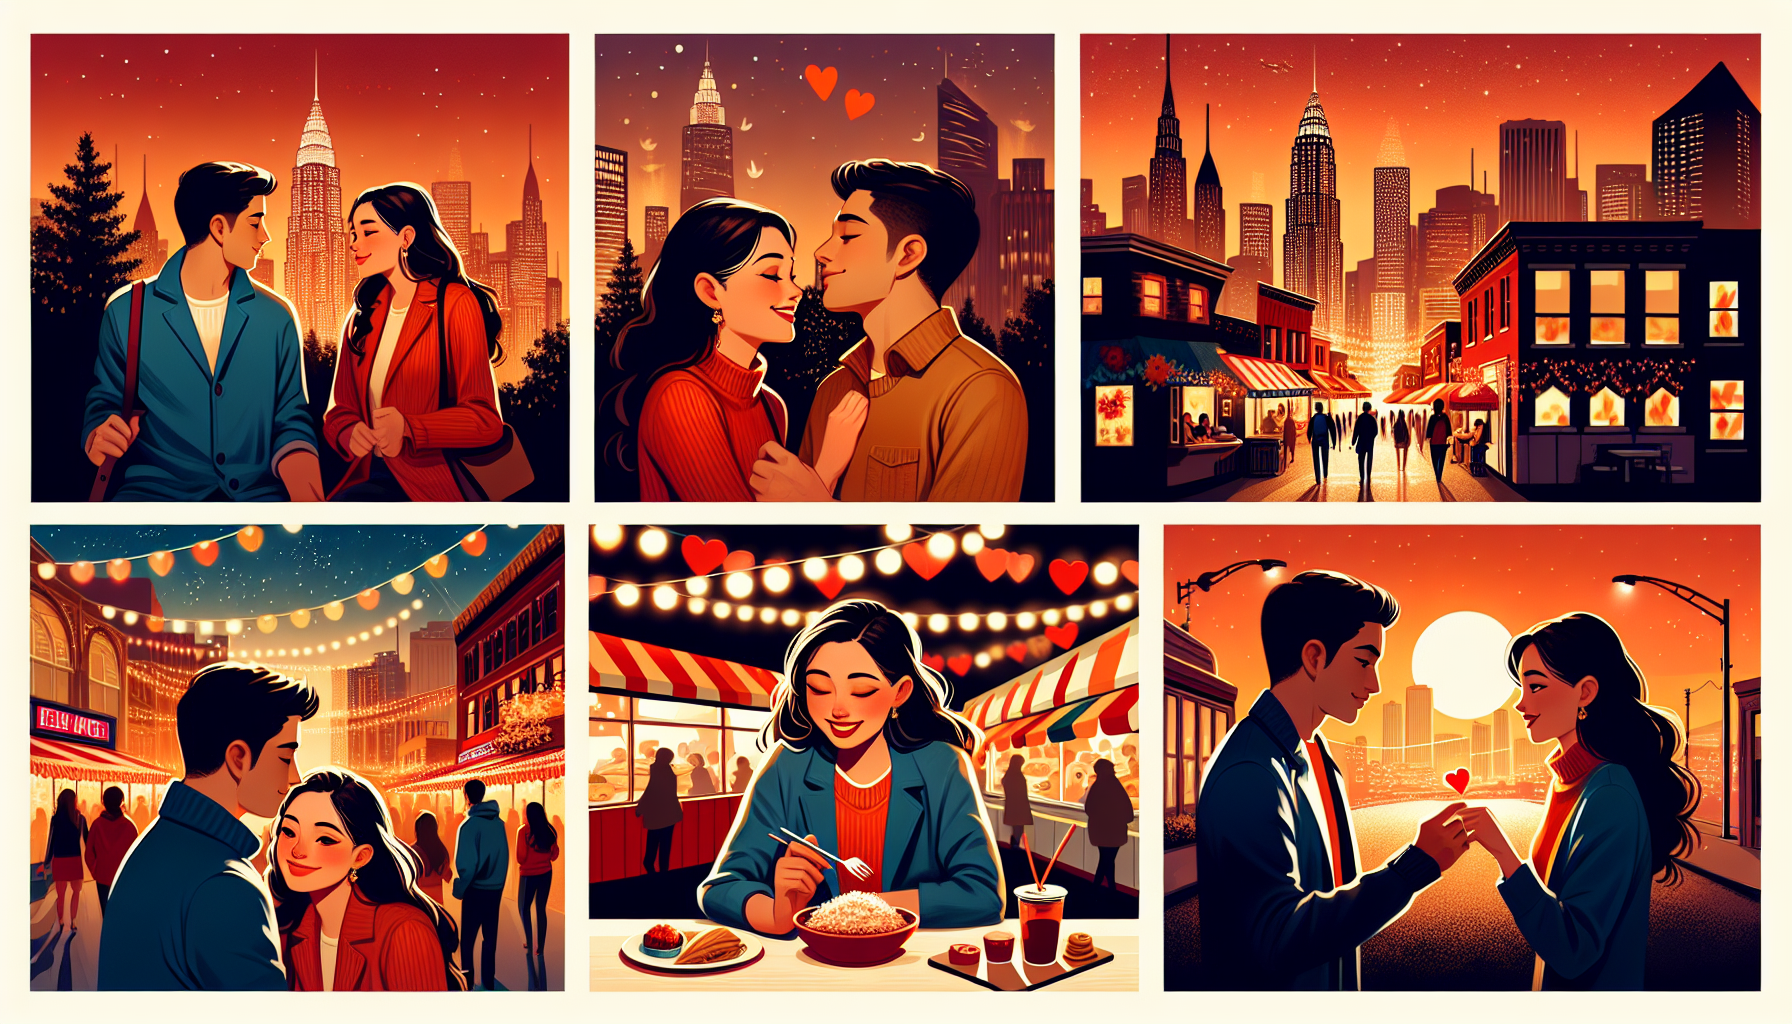 Illustration only depicting a warm, modern, and colorful portrayal of everyday life as inspiration for a romance movie. The image could include moments like a man from South Asian descent and a woman of Hispanic descent locking eyes for the first time in a busy city park, a heart fluttering first date at a vibrant, bustling street food market, the exchanging of sweet notes, and cozy nights in while the city lights sparkle outside. These moments should capture the essence and emotion of modern romance weaved seamlessly into the fabric of daily life.